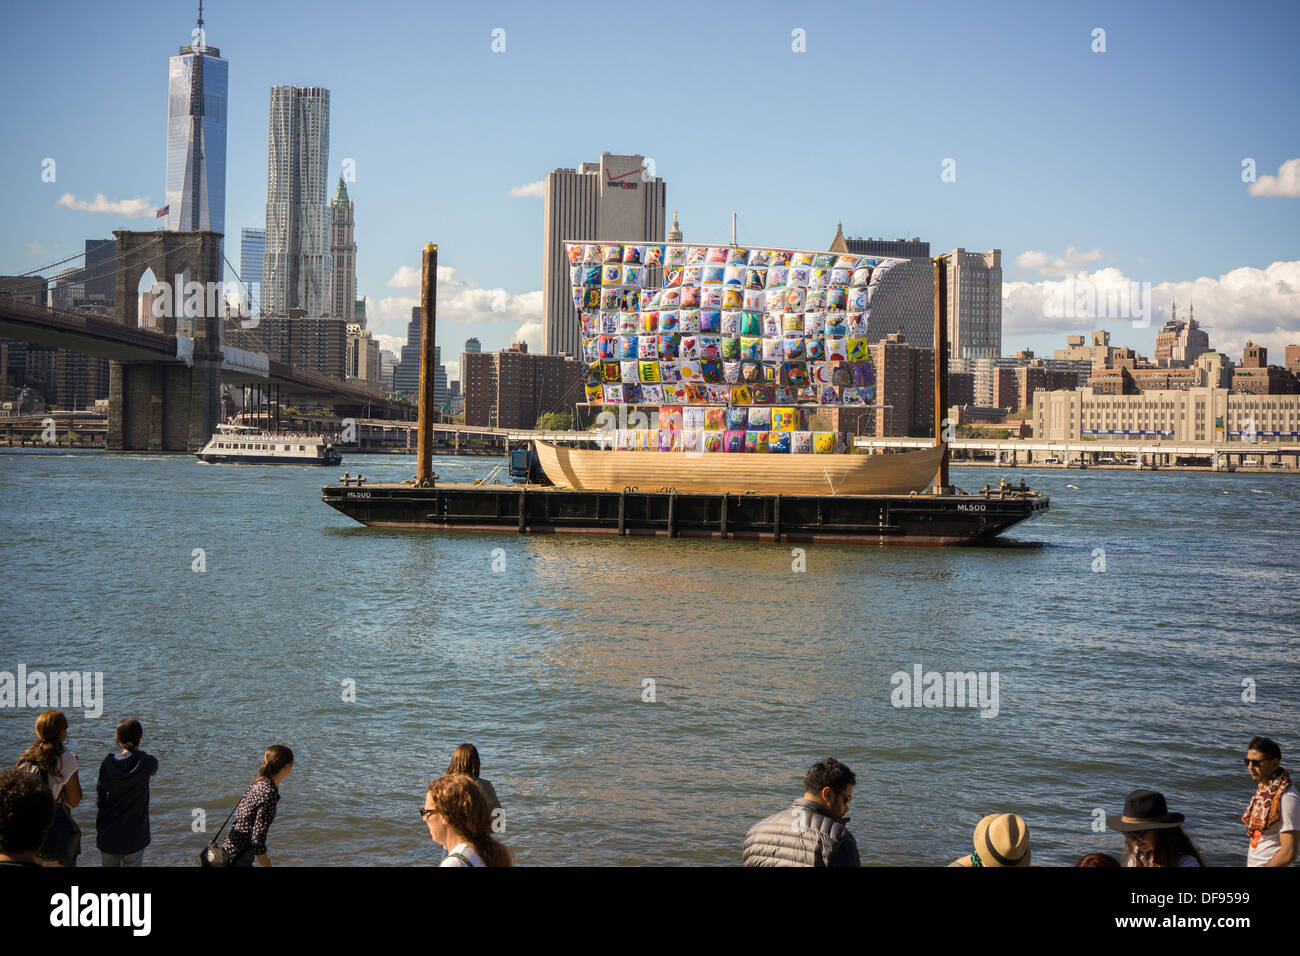 The 'Ship of Tolerance' by the artists Ilya and Emilia Kabakov floats in the Brooklyn neighborhood of Dumbo in NY Stock Photo